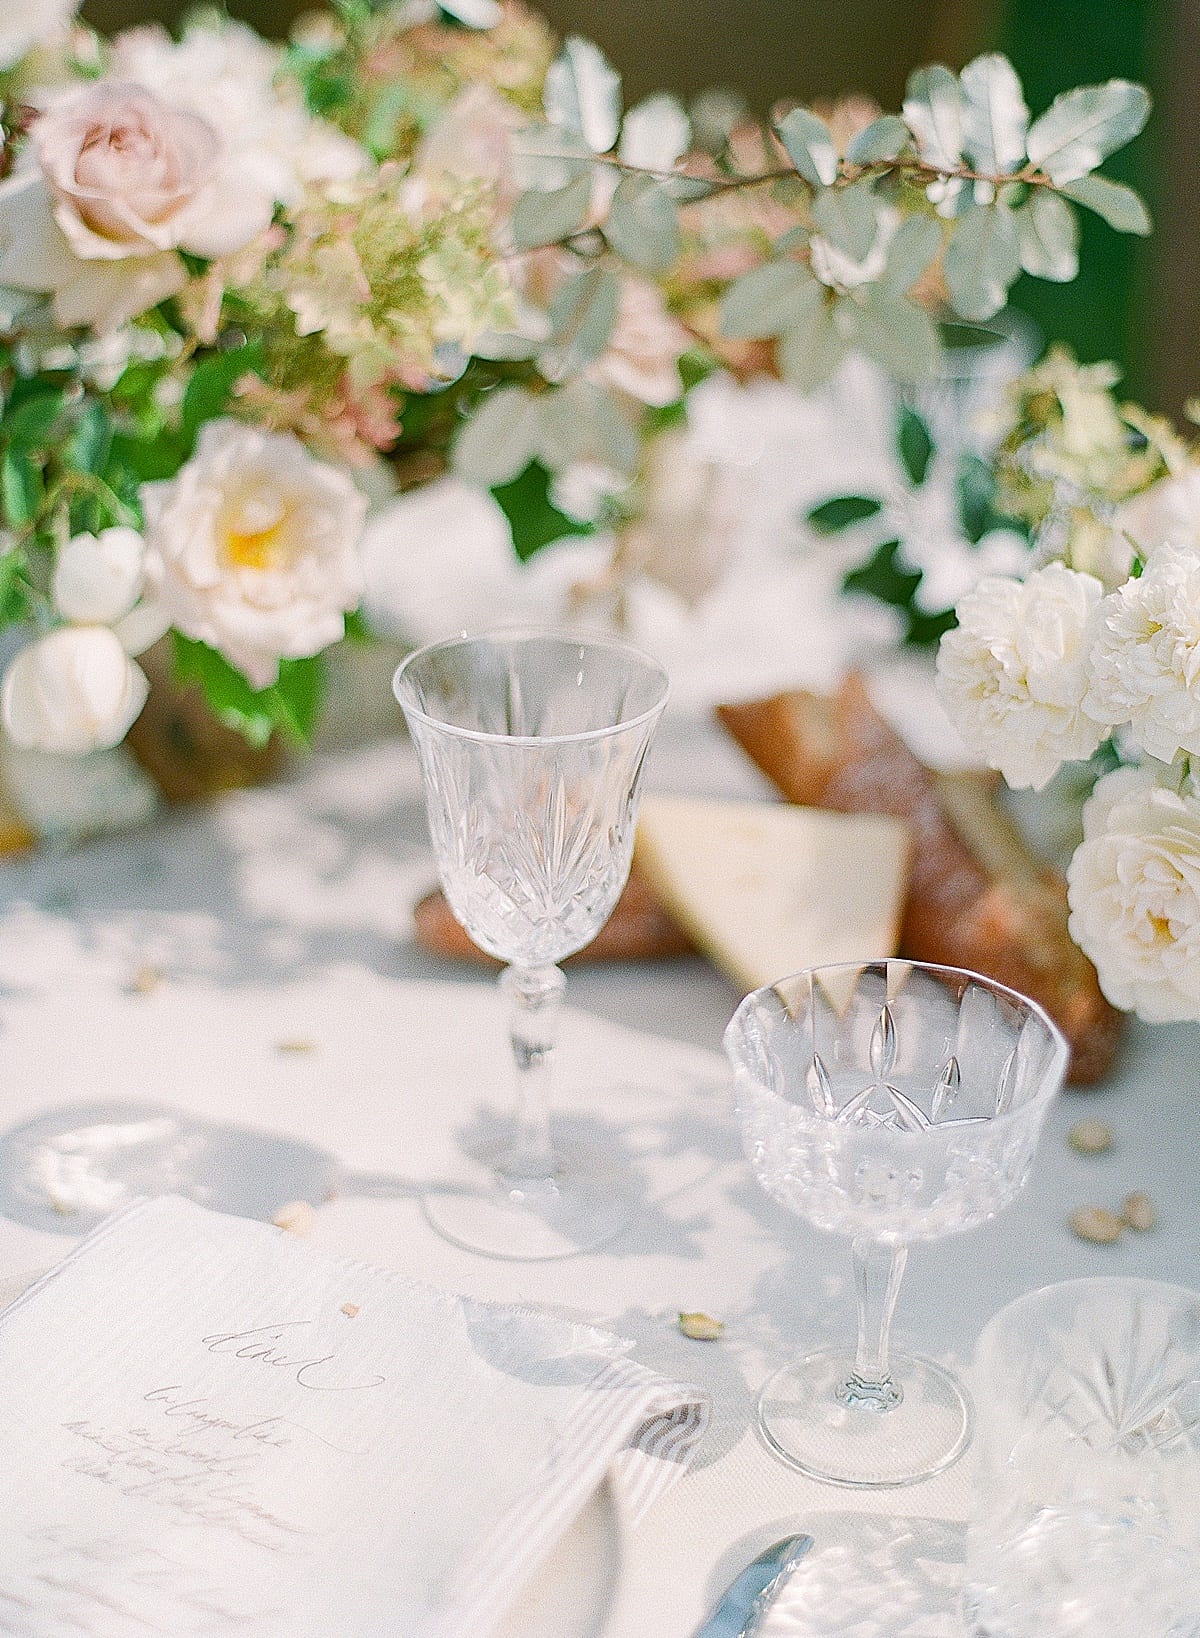 Bloomsbury Farm Wedding Reception Table with Crystal Glasses Photo